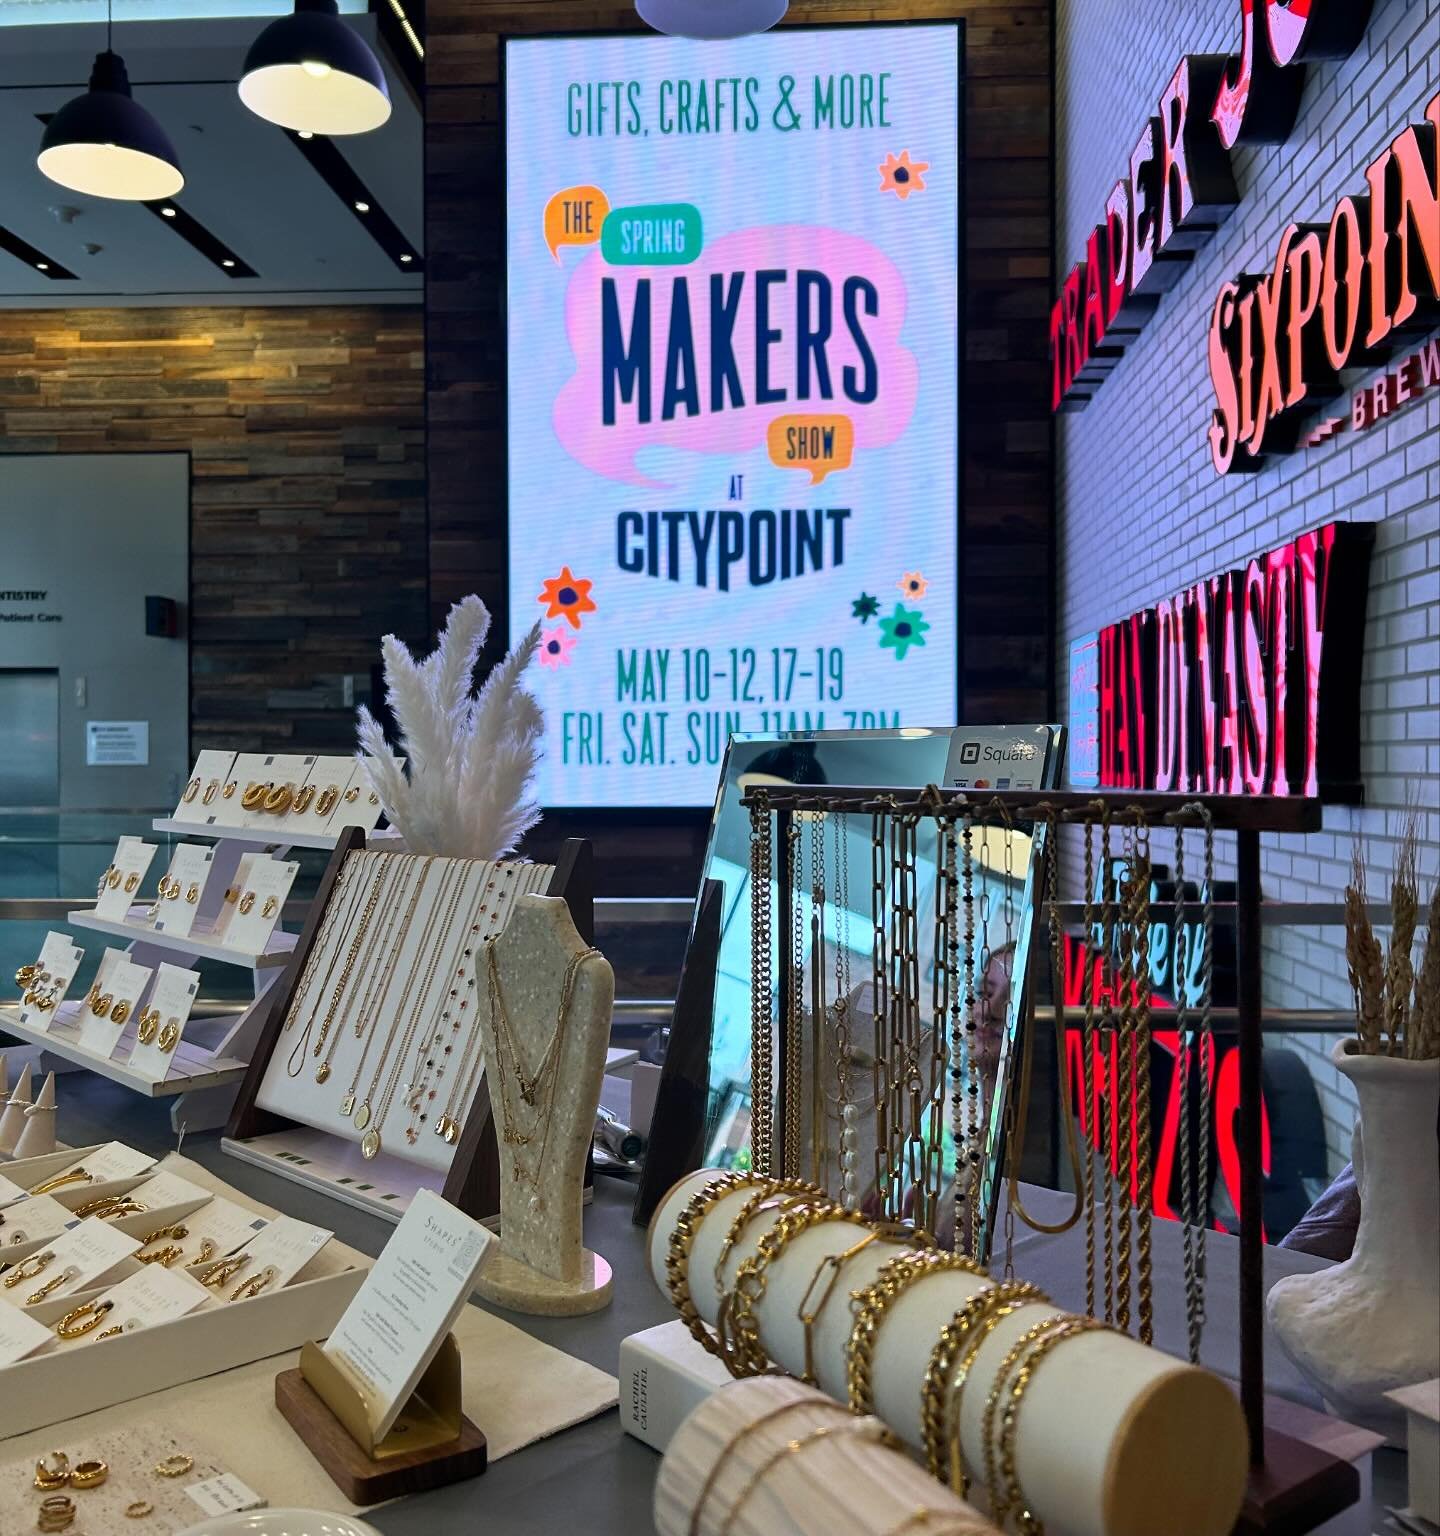 🌼 We&rsquo;re open in downtown Brooklyn! Shop local with us this weekend at @citypointbklyn, we&rsquo;re here 11am - 7pm daily through Sunday! 😎 

✨🌞Seaport Summer Market🌊✨
🗓 Sat - Sun, May 11-June 30, Aug 24- Sept 21
⏰11am - 7pm 
🌇 @seaportbos